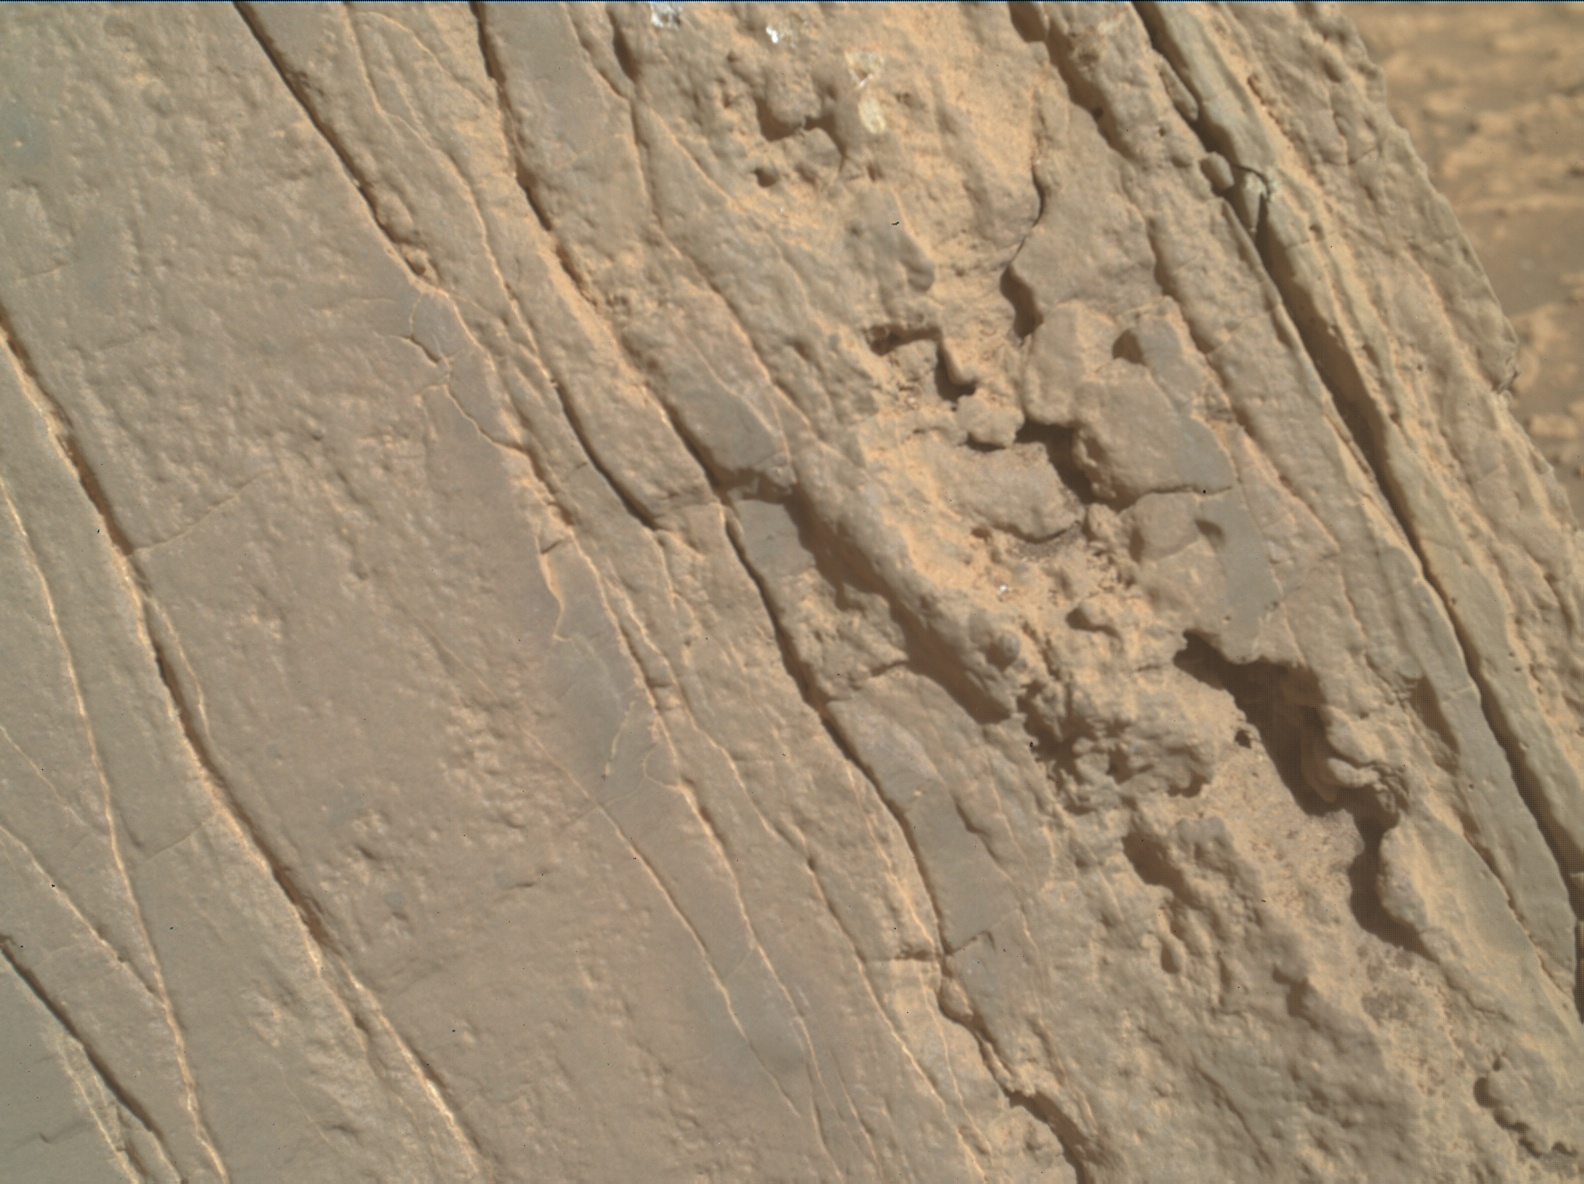 Nasa's Mars rover Curiosity acquired this image using its Mars Hand Lens Imager (MAHLI) on Sol 3553